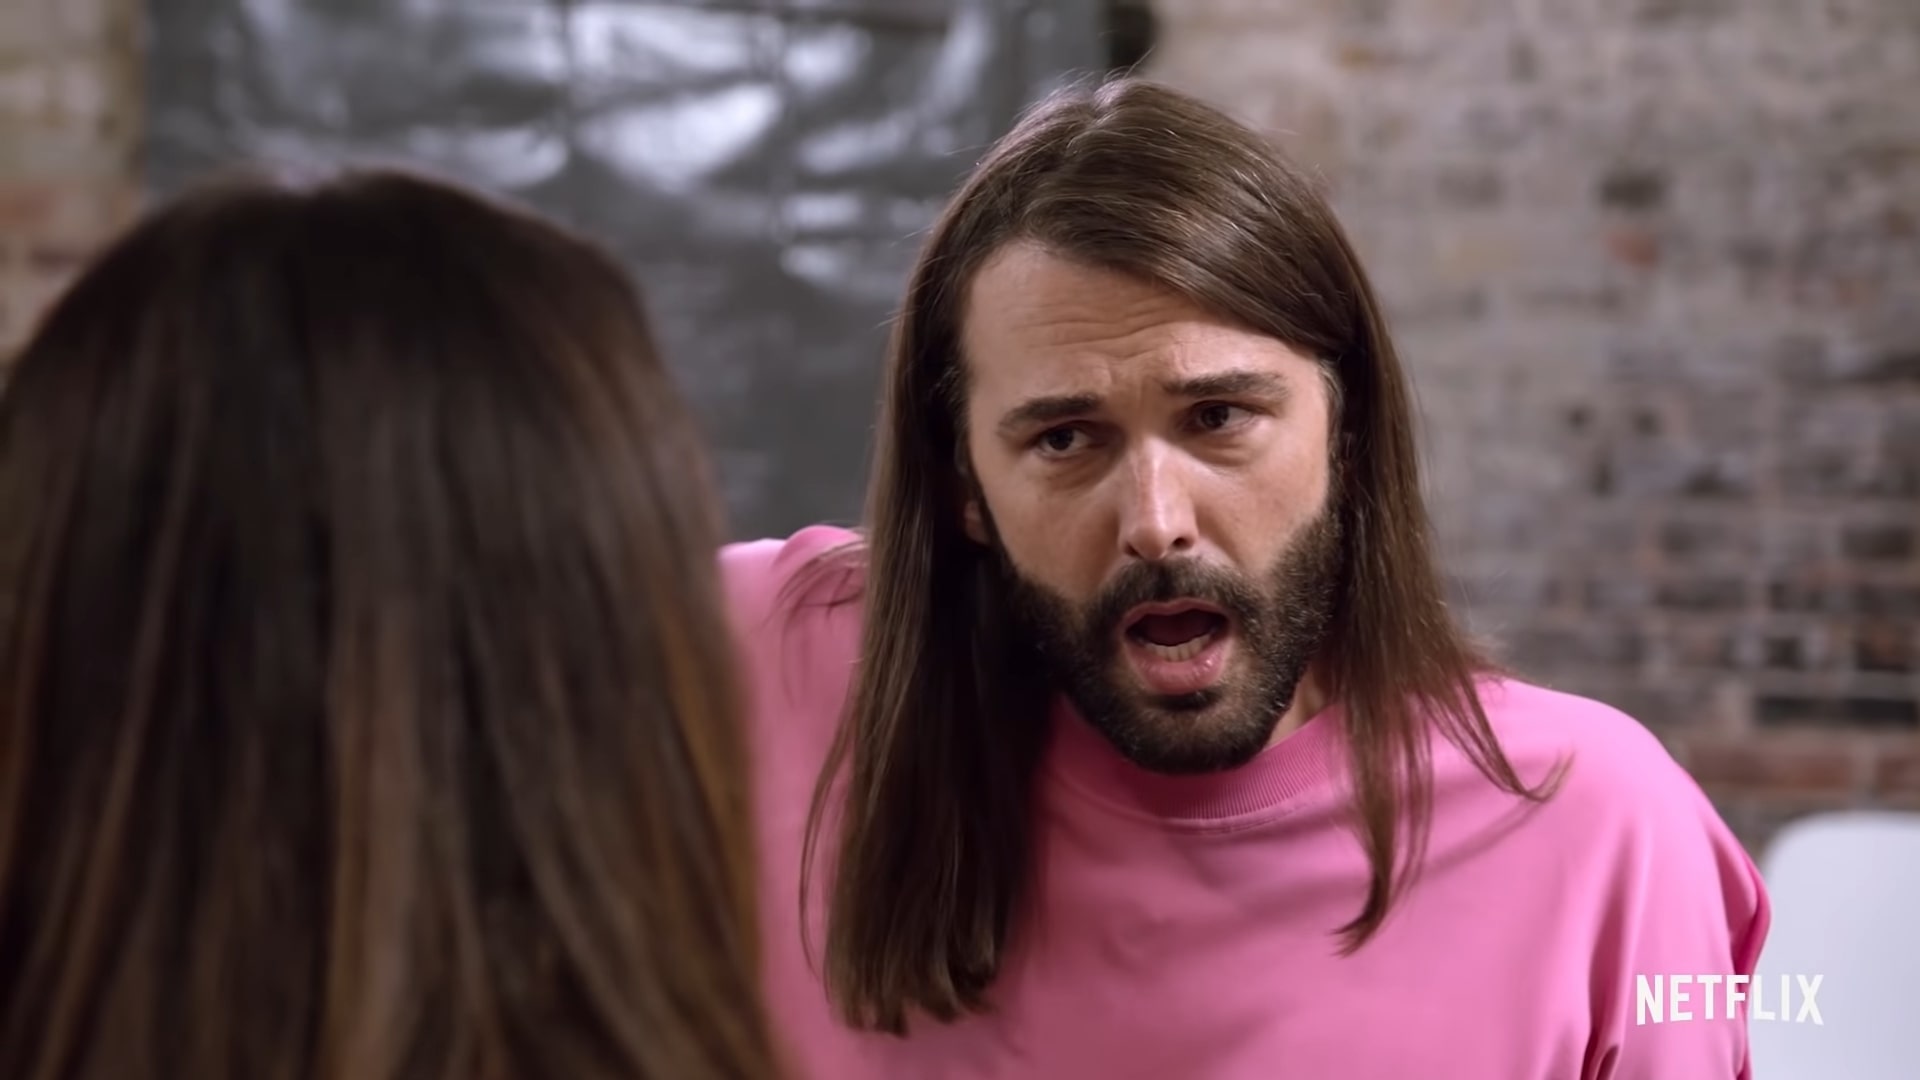 Getting Curious with Jonathan Van Ness Trailer, Coming to Netflix in January 2022